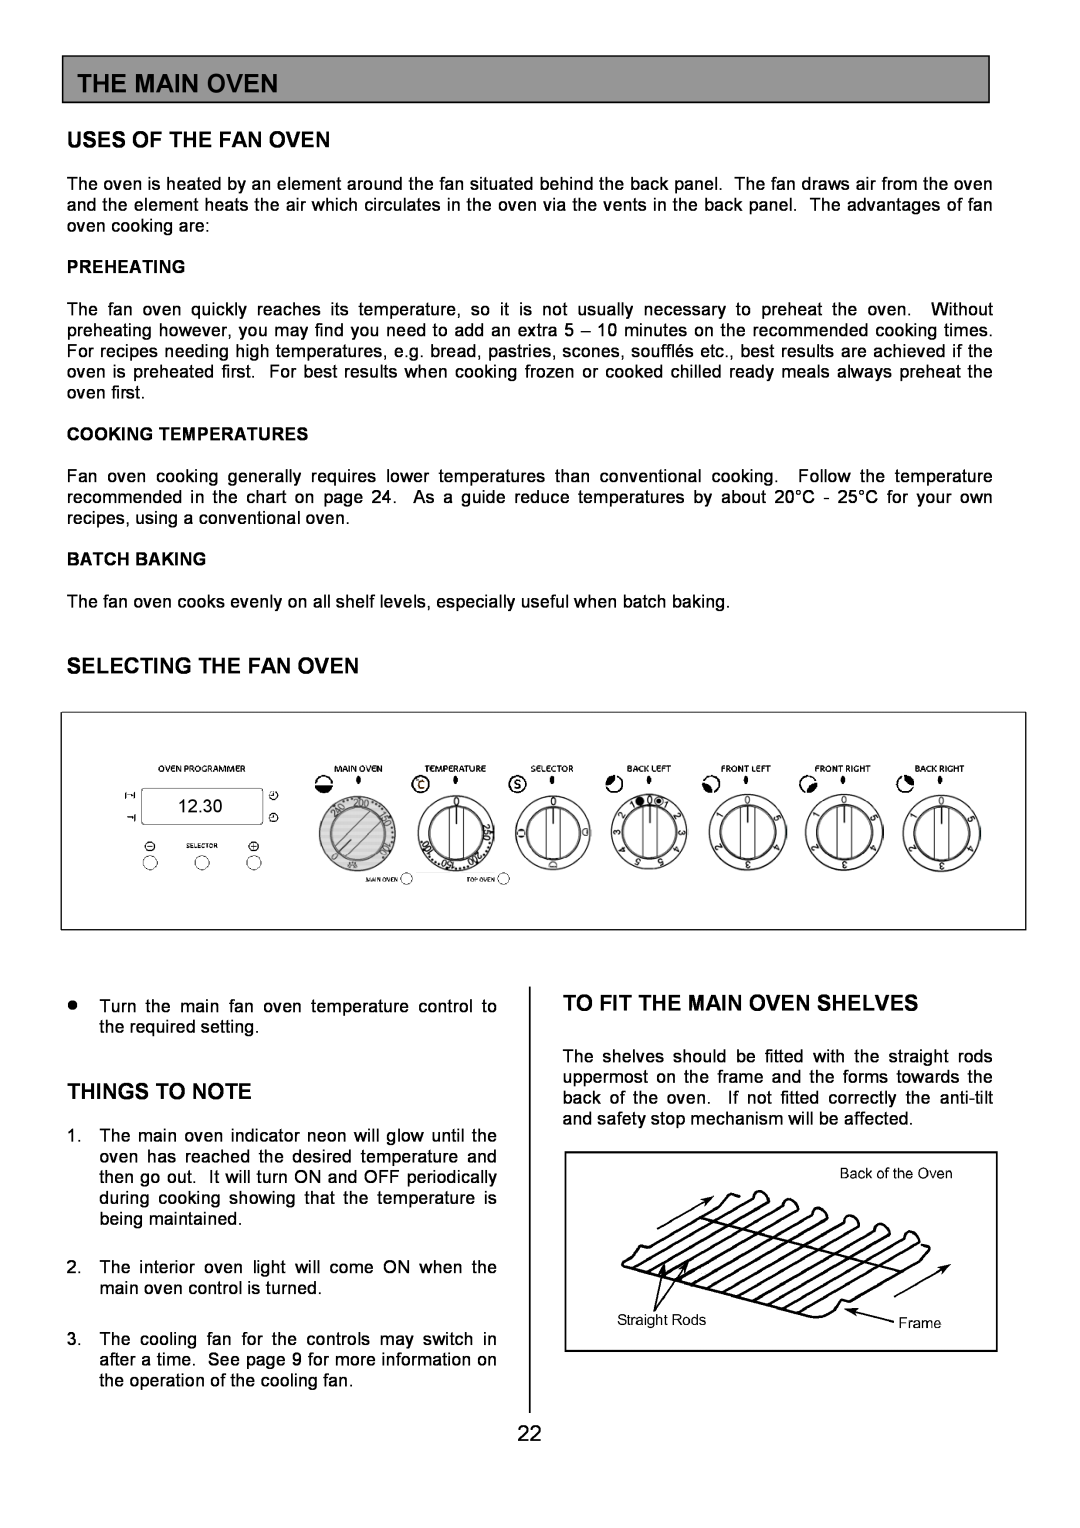 Tricity Bendix SE454 Uses Of The Fan Oven, Selecting The Fan Oven, To Fit The Main Oven Shelves, Things To Note 